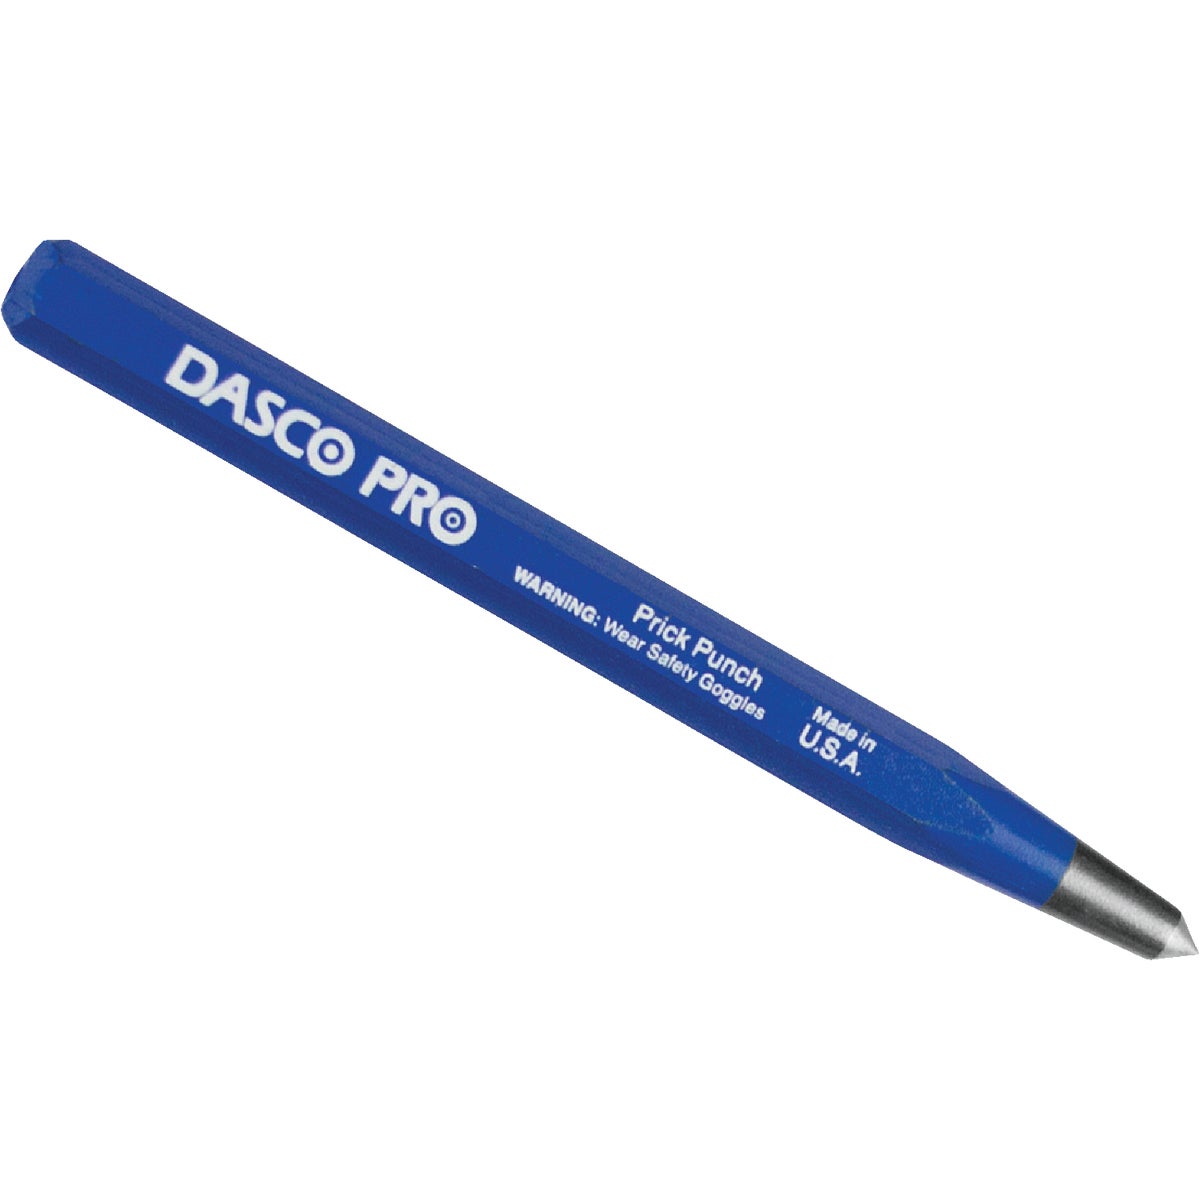 Item 340278, Mayhew Prick Punches are used to scribe lines in metal before cutting and 